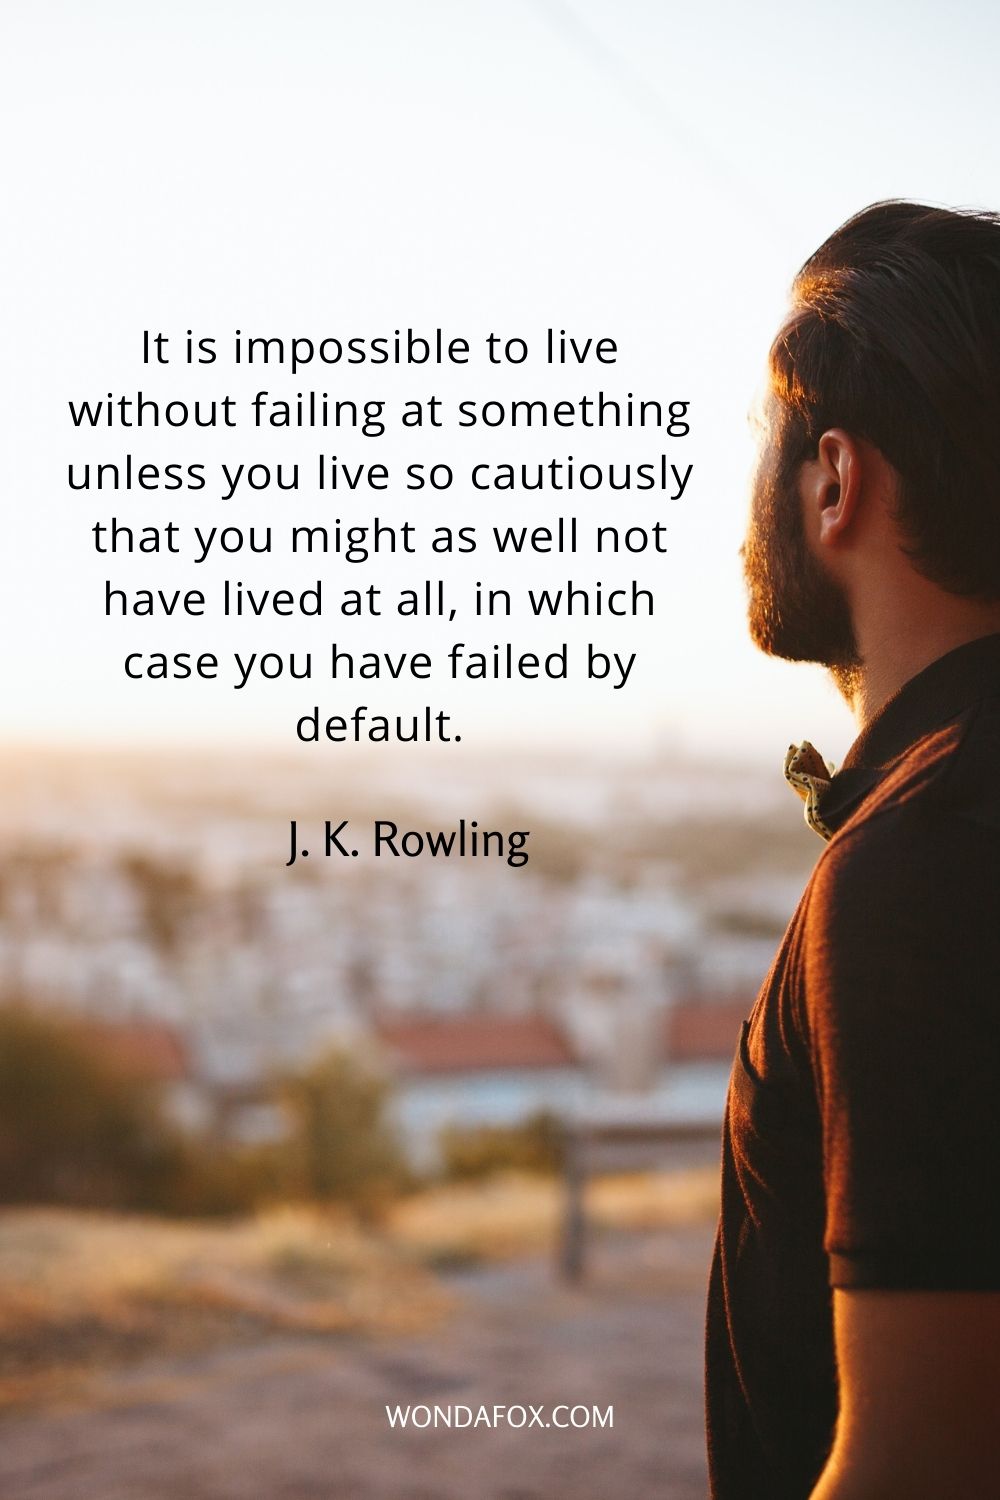 It is impossible to live without failing at something unless you live so cautiously that you might as well not have lived at all, in which case you have failed by default.